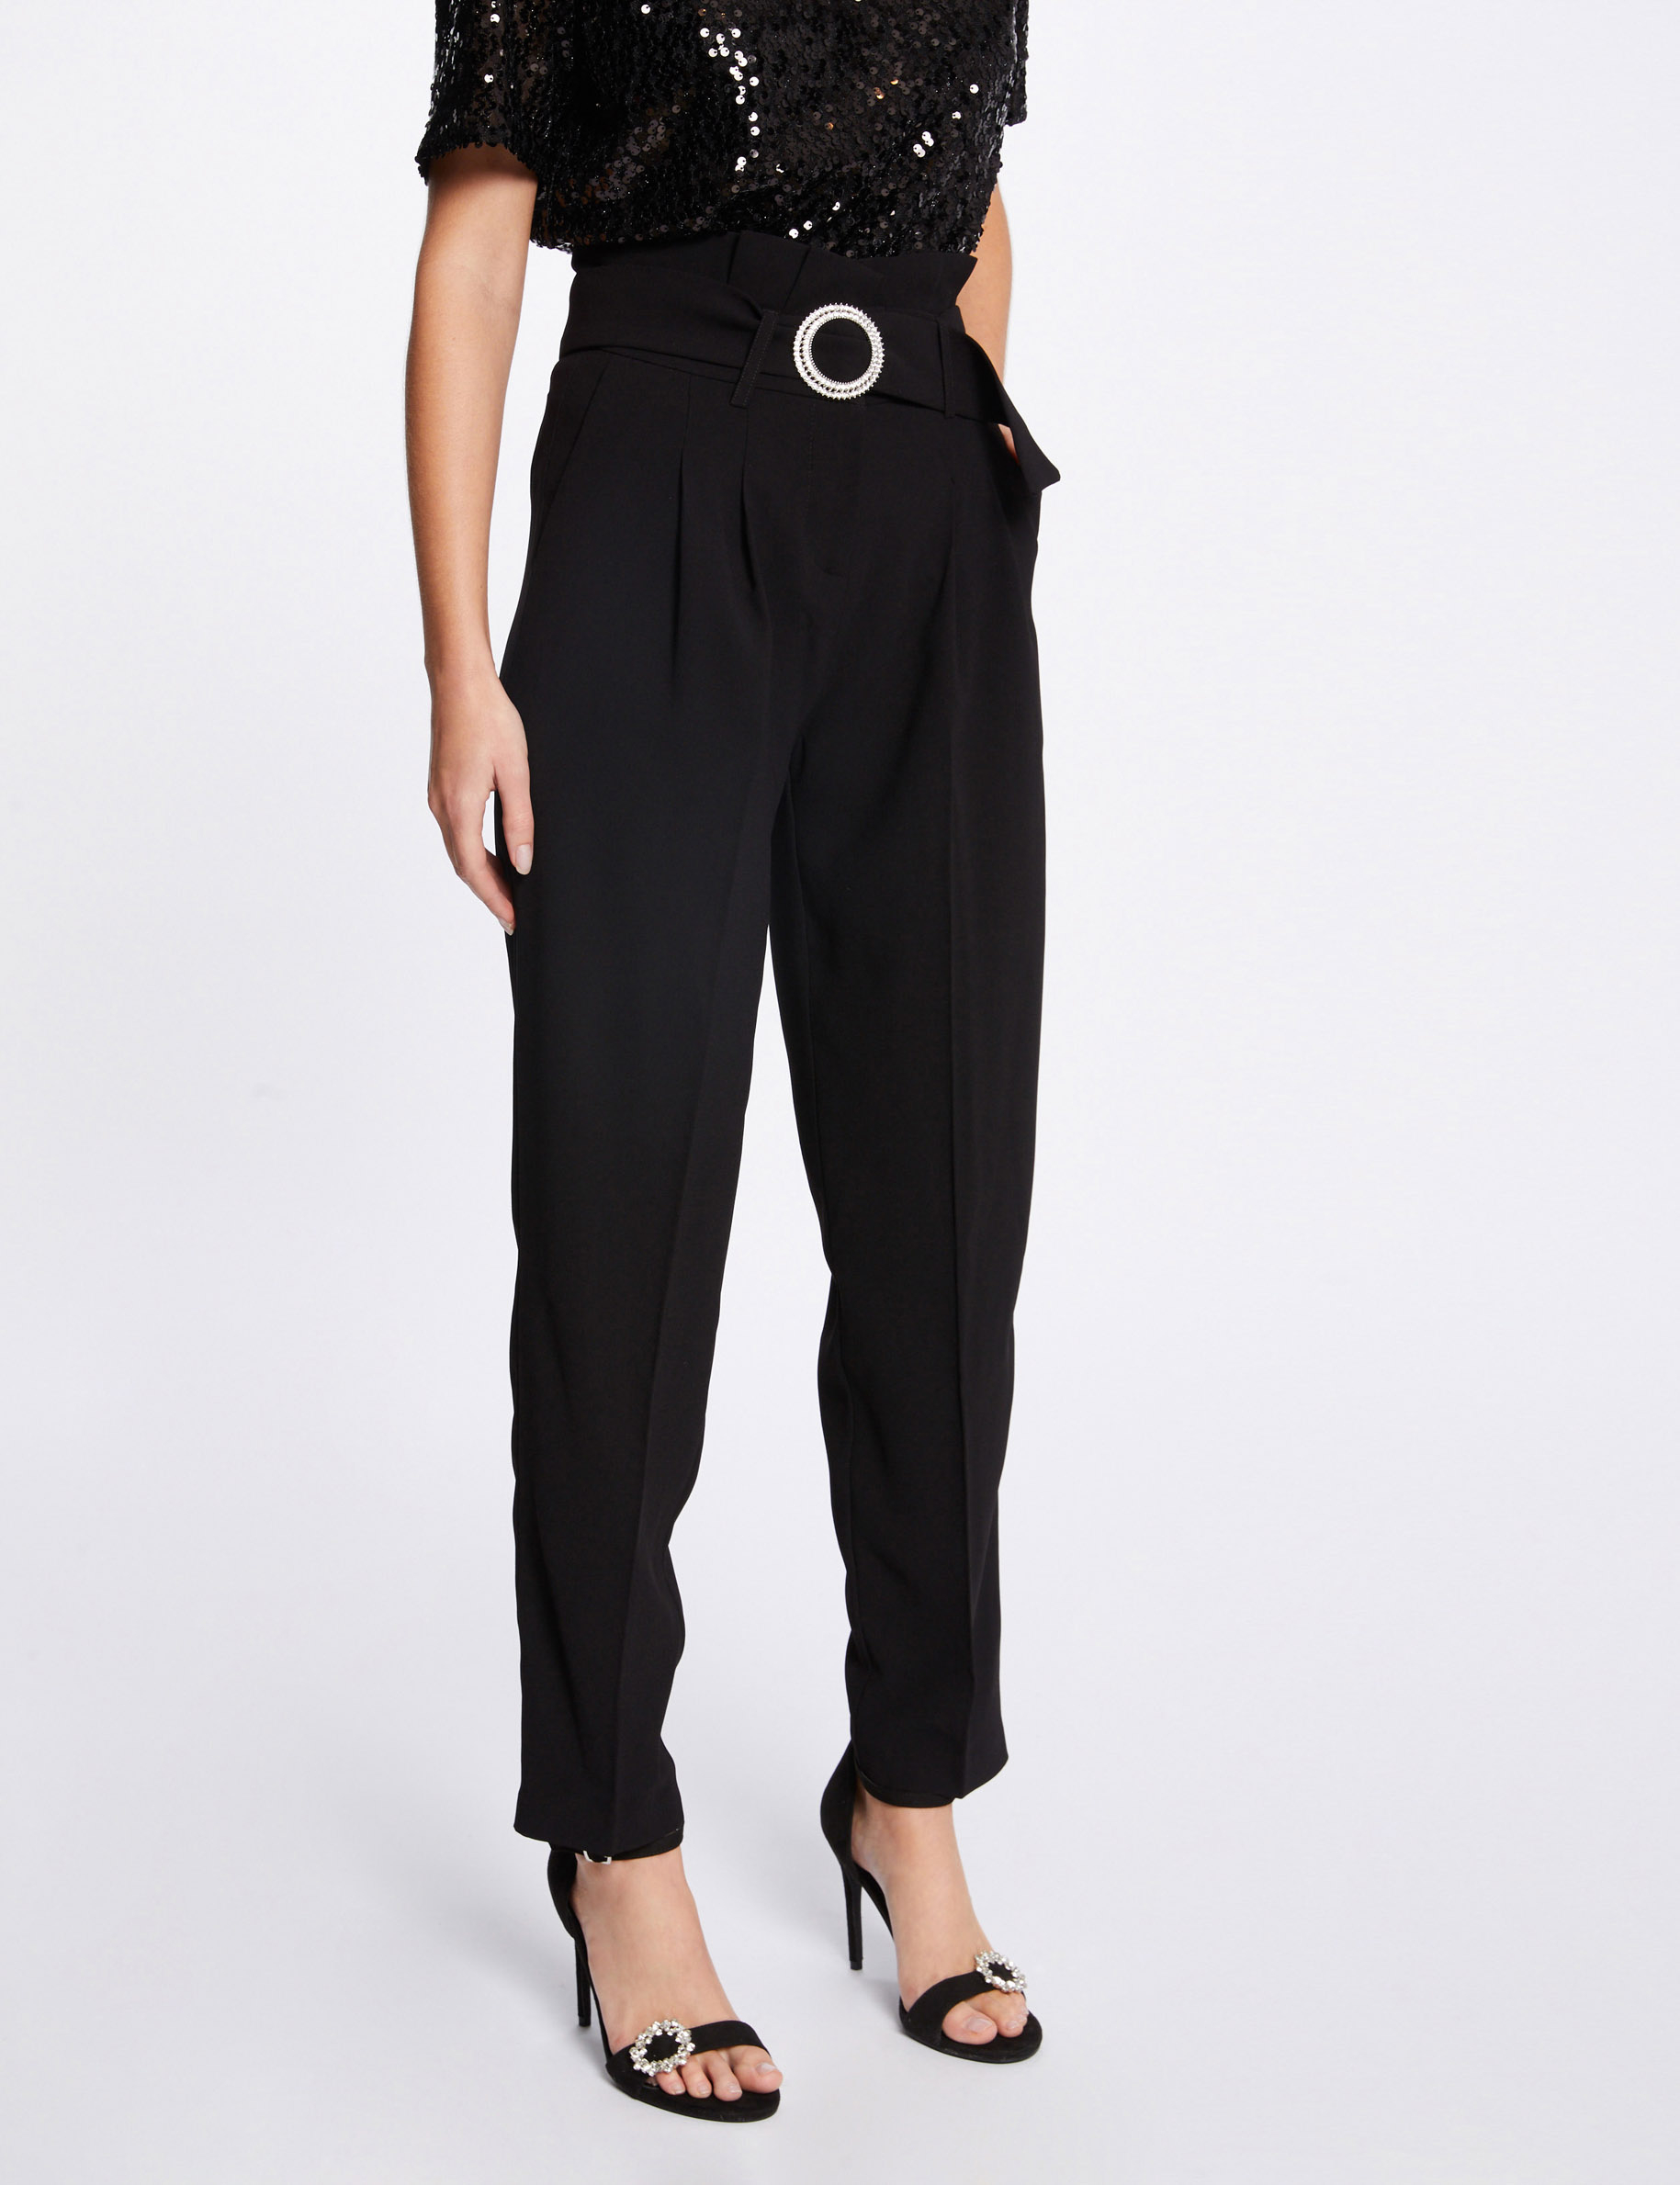 High-waisted straight belted trousers black ladies'